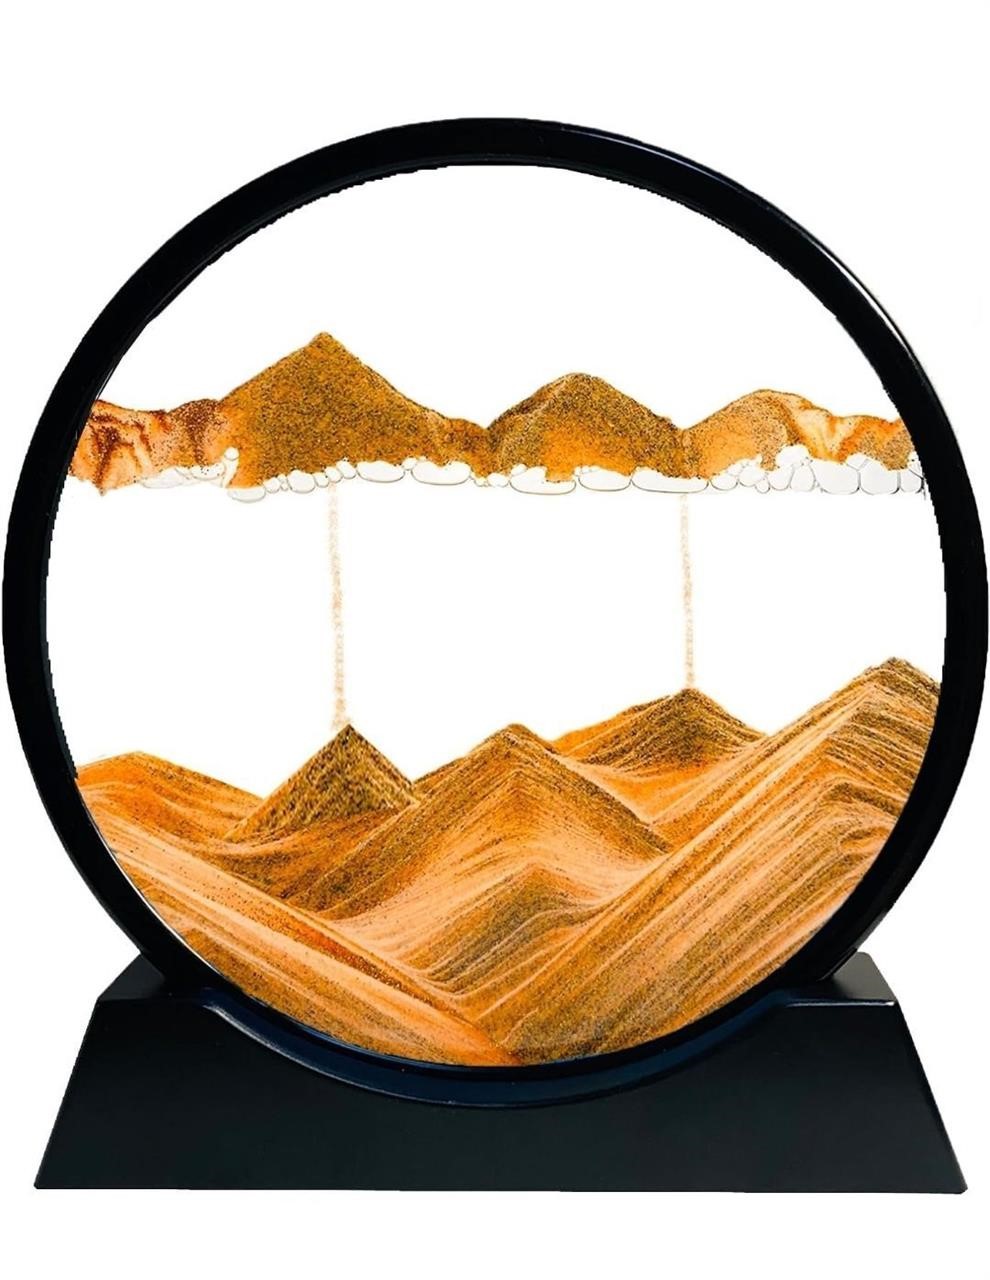 ($30) AOLI-FLY Sand Paint, Moving Sand Image, 3D